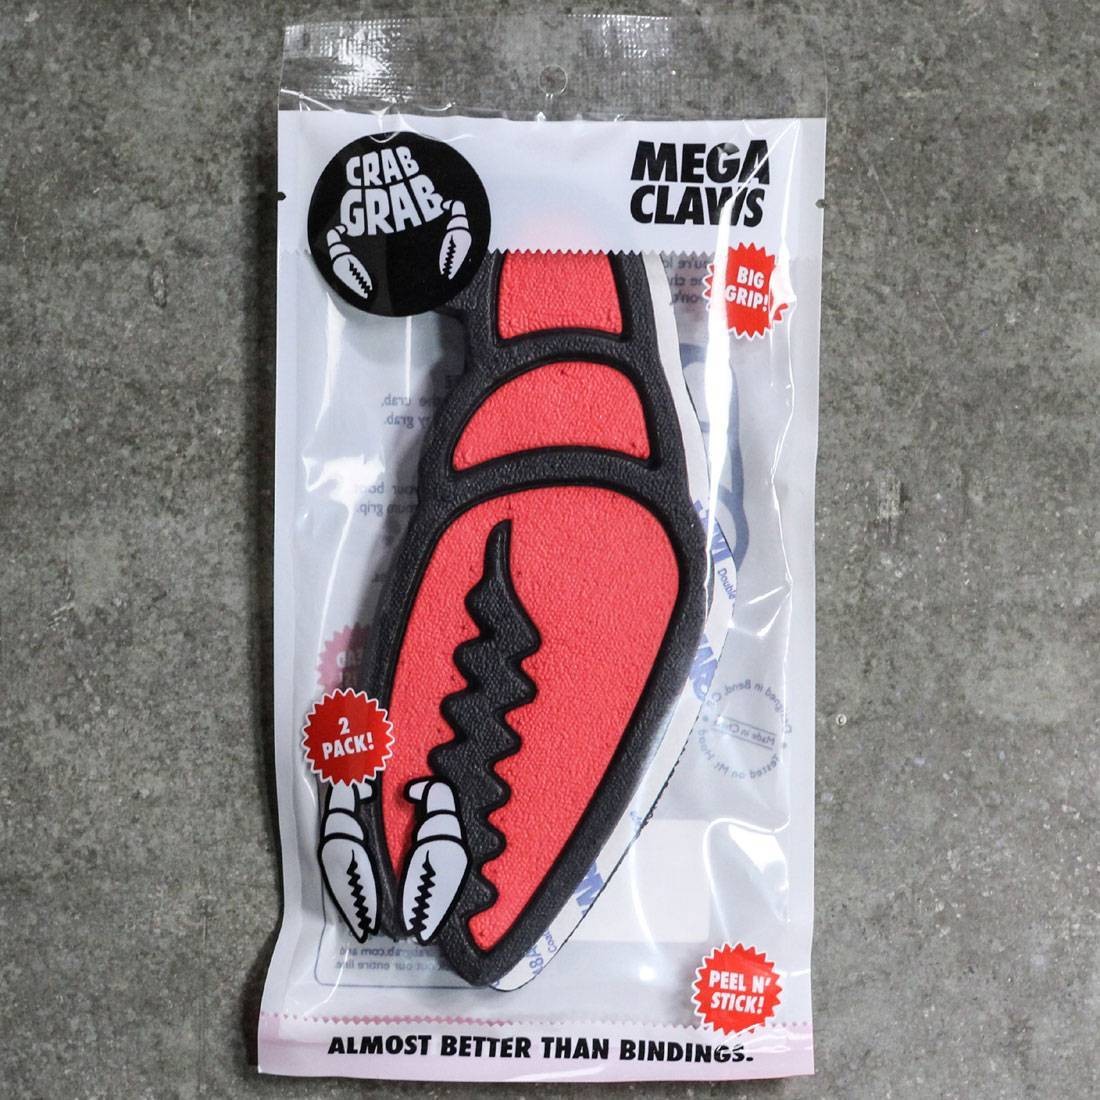 Crab Grab Unisex Mega Claws Traction Pads 2 Pack BlackRed 